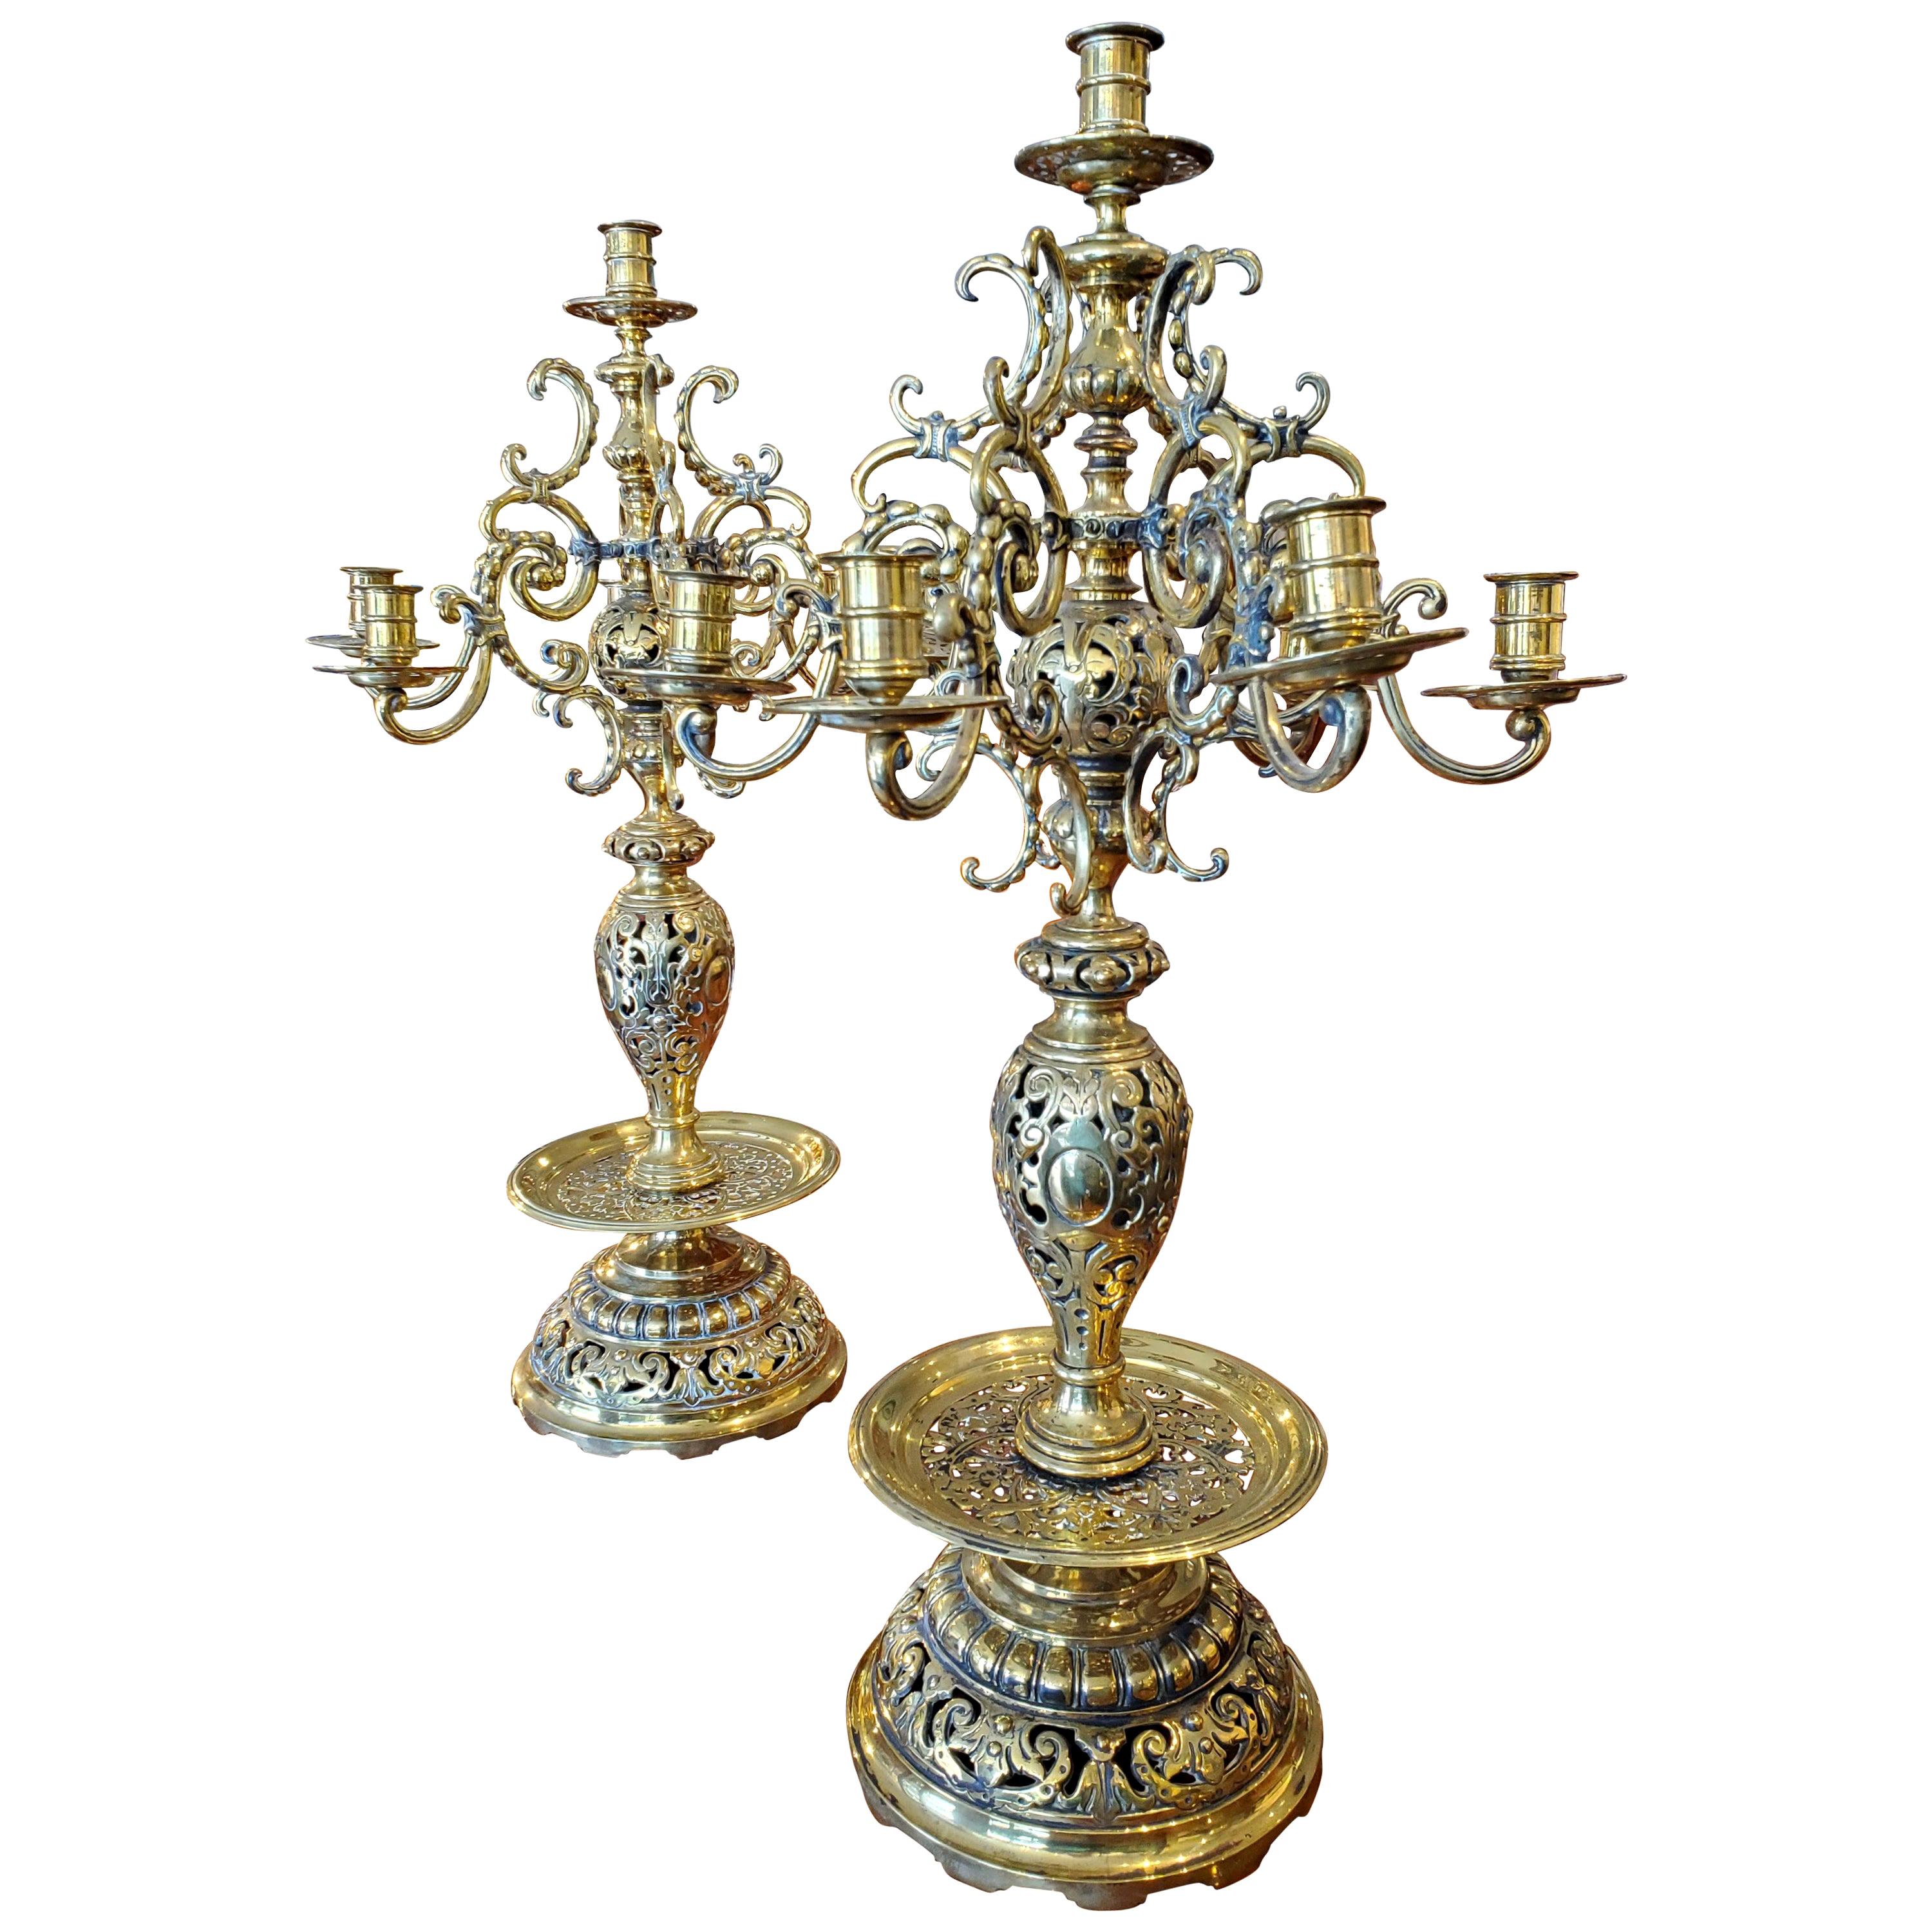 Large Pair of 19th Century Russian Brass Candelabra with Turkish Influence For Sale